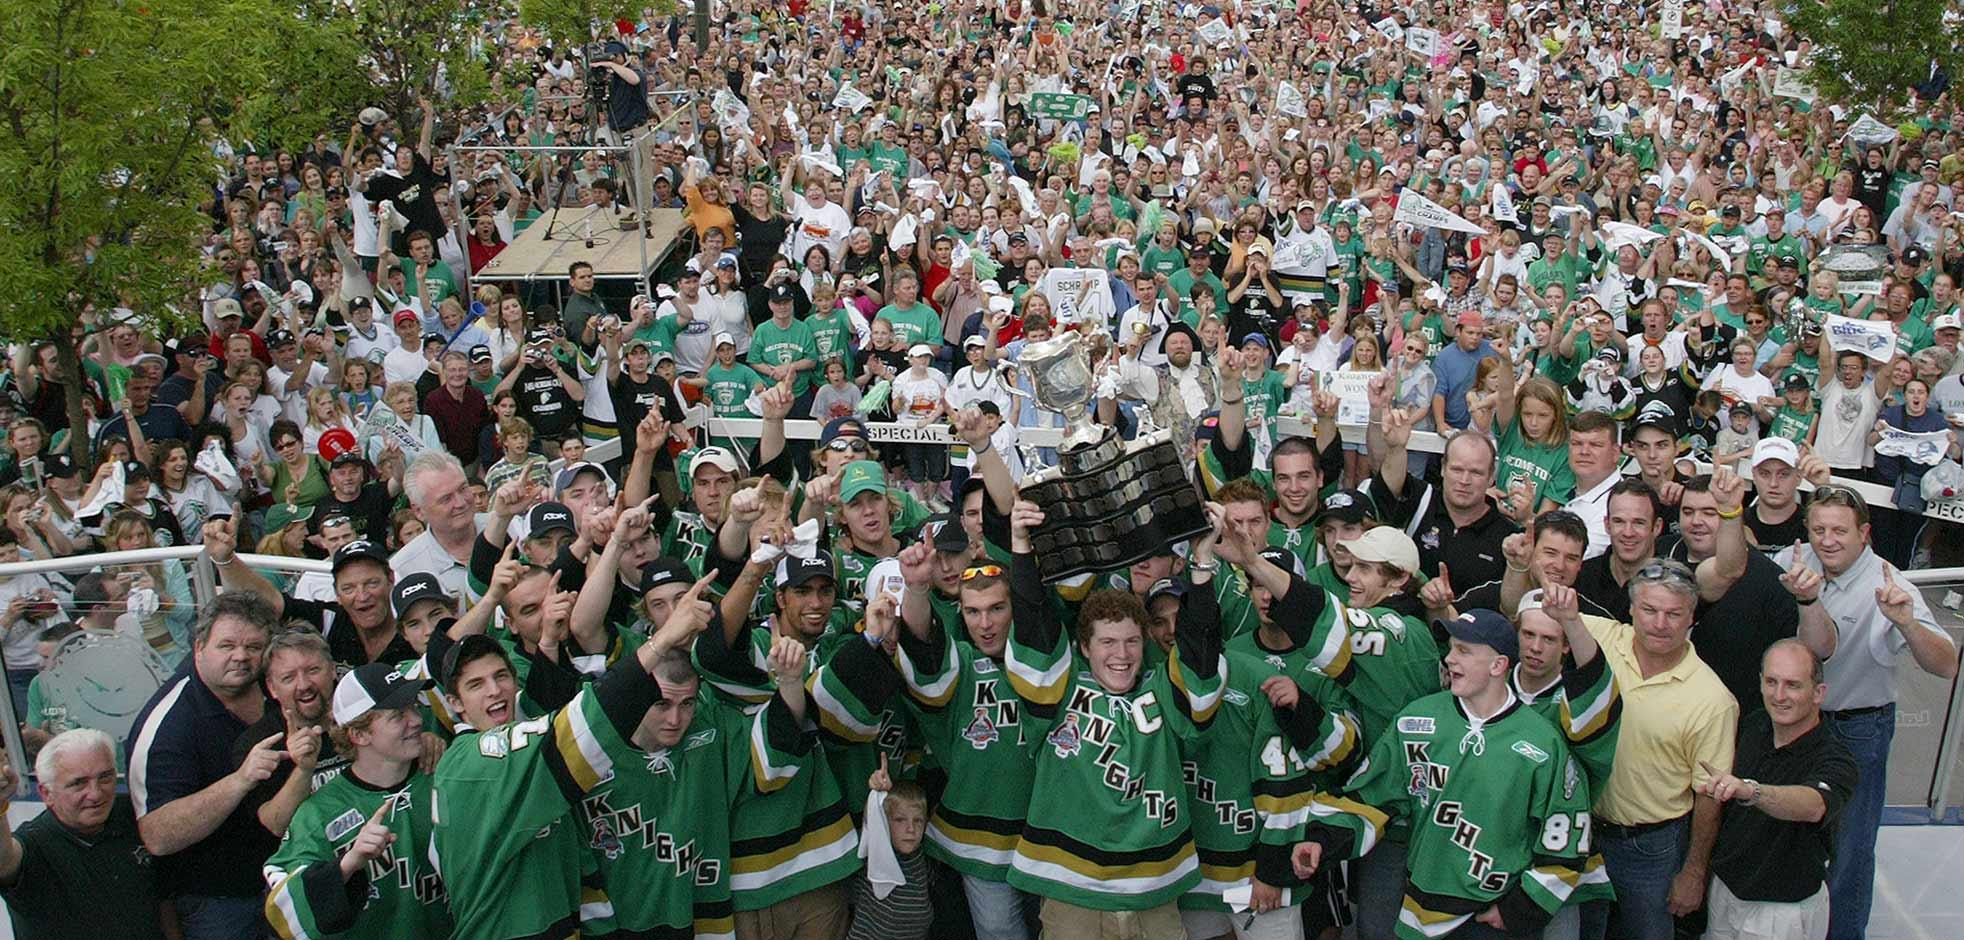 A gathering outside of Budweiser Gardens in London, Ontario celebrating the 2005 Memorial Cup victory of the London Knights